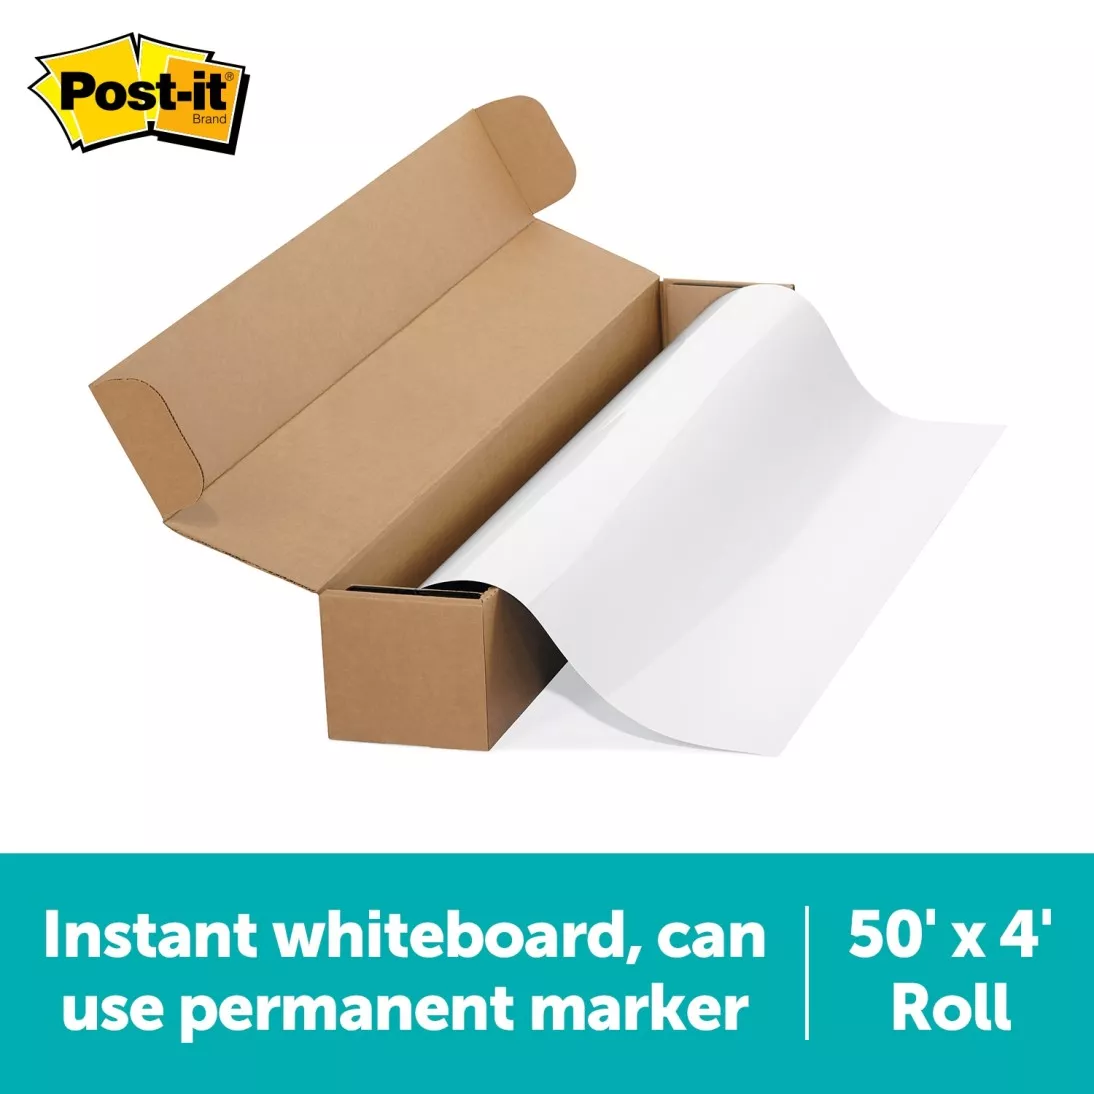 Post-it® Flex Write Surface, The Permanent Marker Whiteboard Surface
FWS50x4, 50 ft x 4 ft